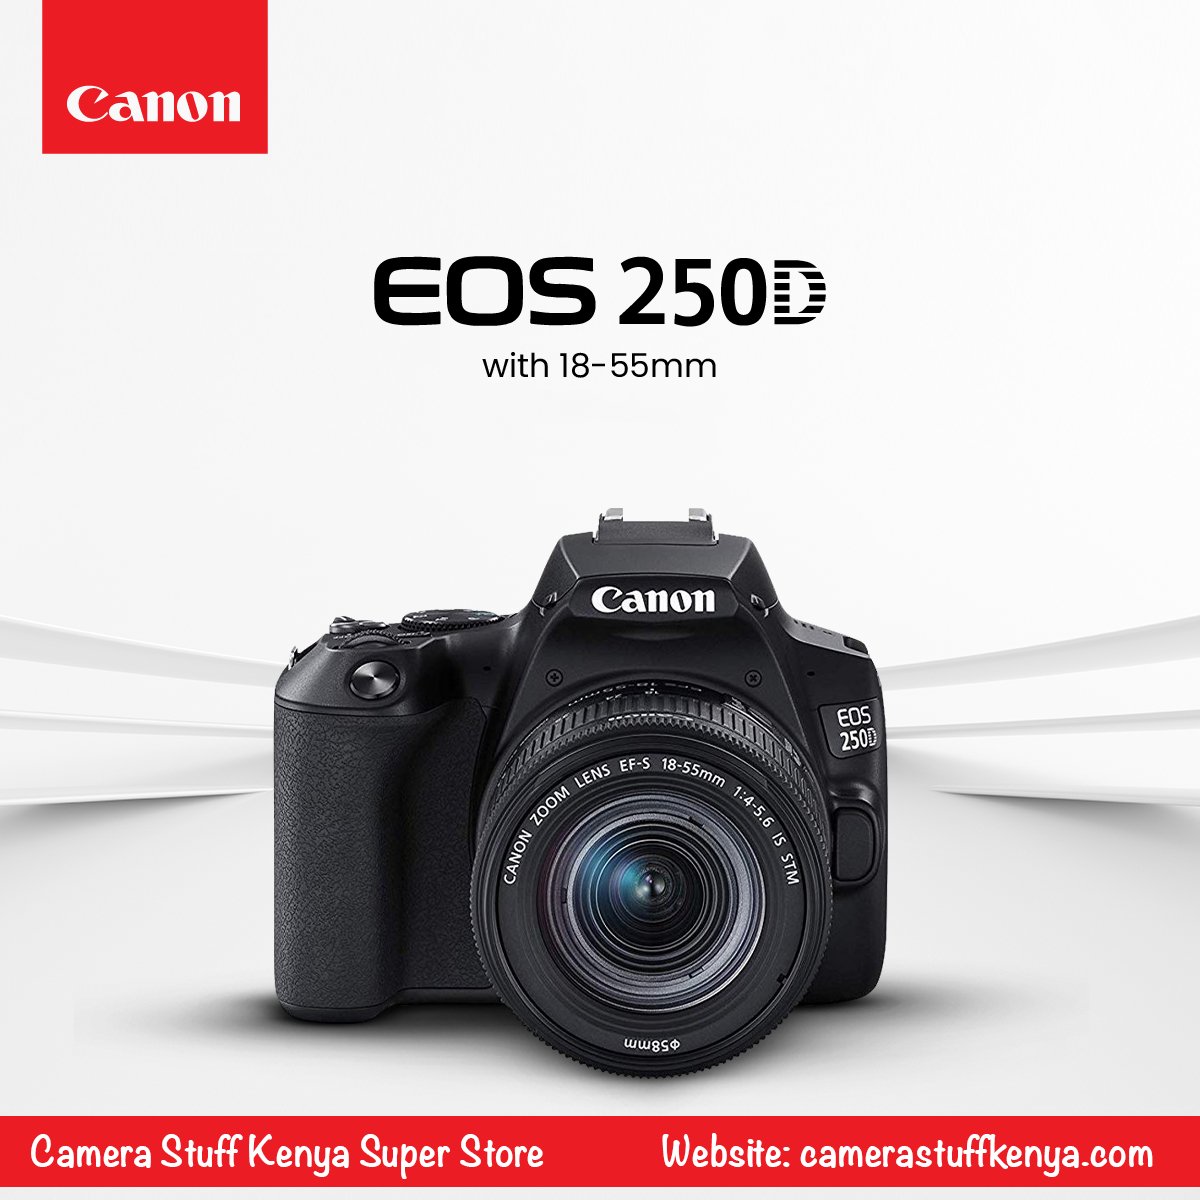 Canon EOS 250D DSLR Camera with EF-S 18-55mm Lens

- UHD 4K24p Video and 4K Time-Lapse Movie
- 24.1MP APS-C CMOS Sensor
- DIGIC 8 Image Processor
- 3.0″ 1.04m-Dot Vari-Angle Touchscreen
- Built-In Wi-Fi and Bluetooth

camerastuffkenya.com/product/canon-…